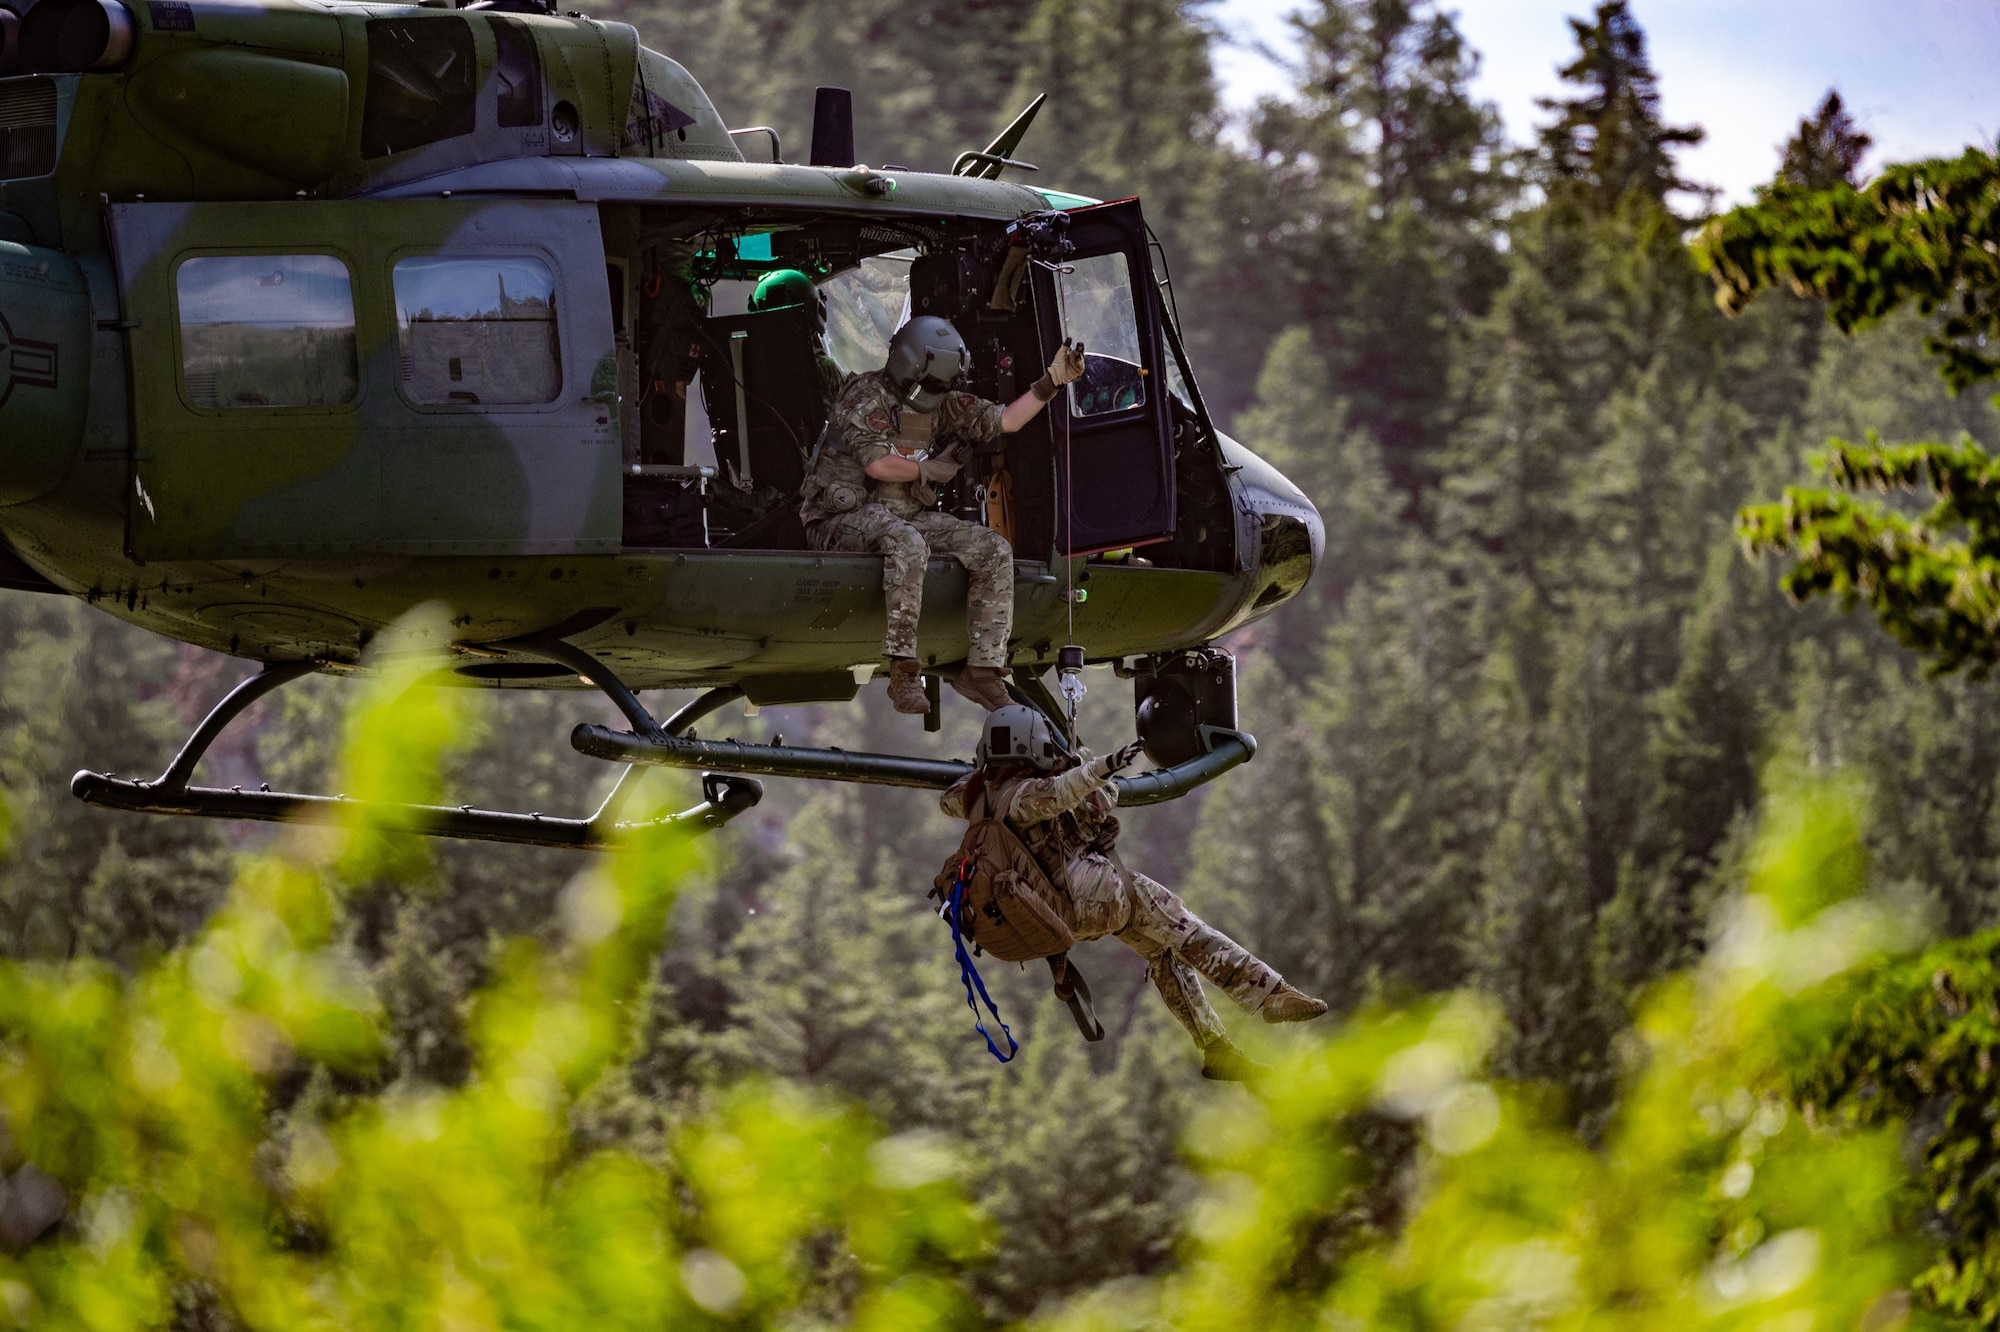 Tech. Sgt. Alex Landers, 40st Helicopter Squadron flight engineer, lowers Maj. Joyanne Tesei, 341st Medical Group flight doctor, out of an UH-N1 Huey during a search and rescue exercise August 3, 2022, in Sluice Boxes State Park.